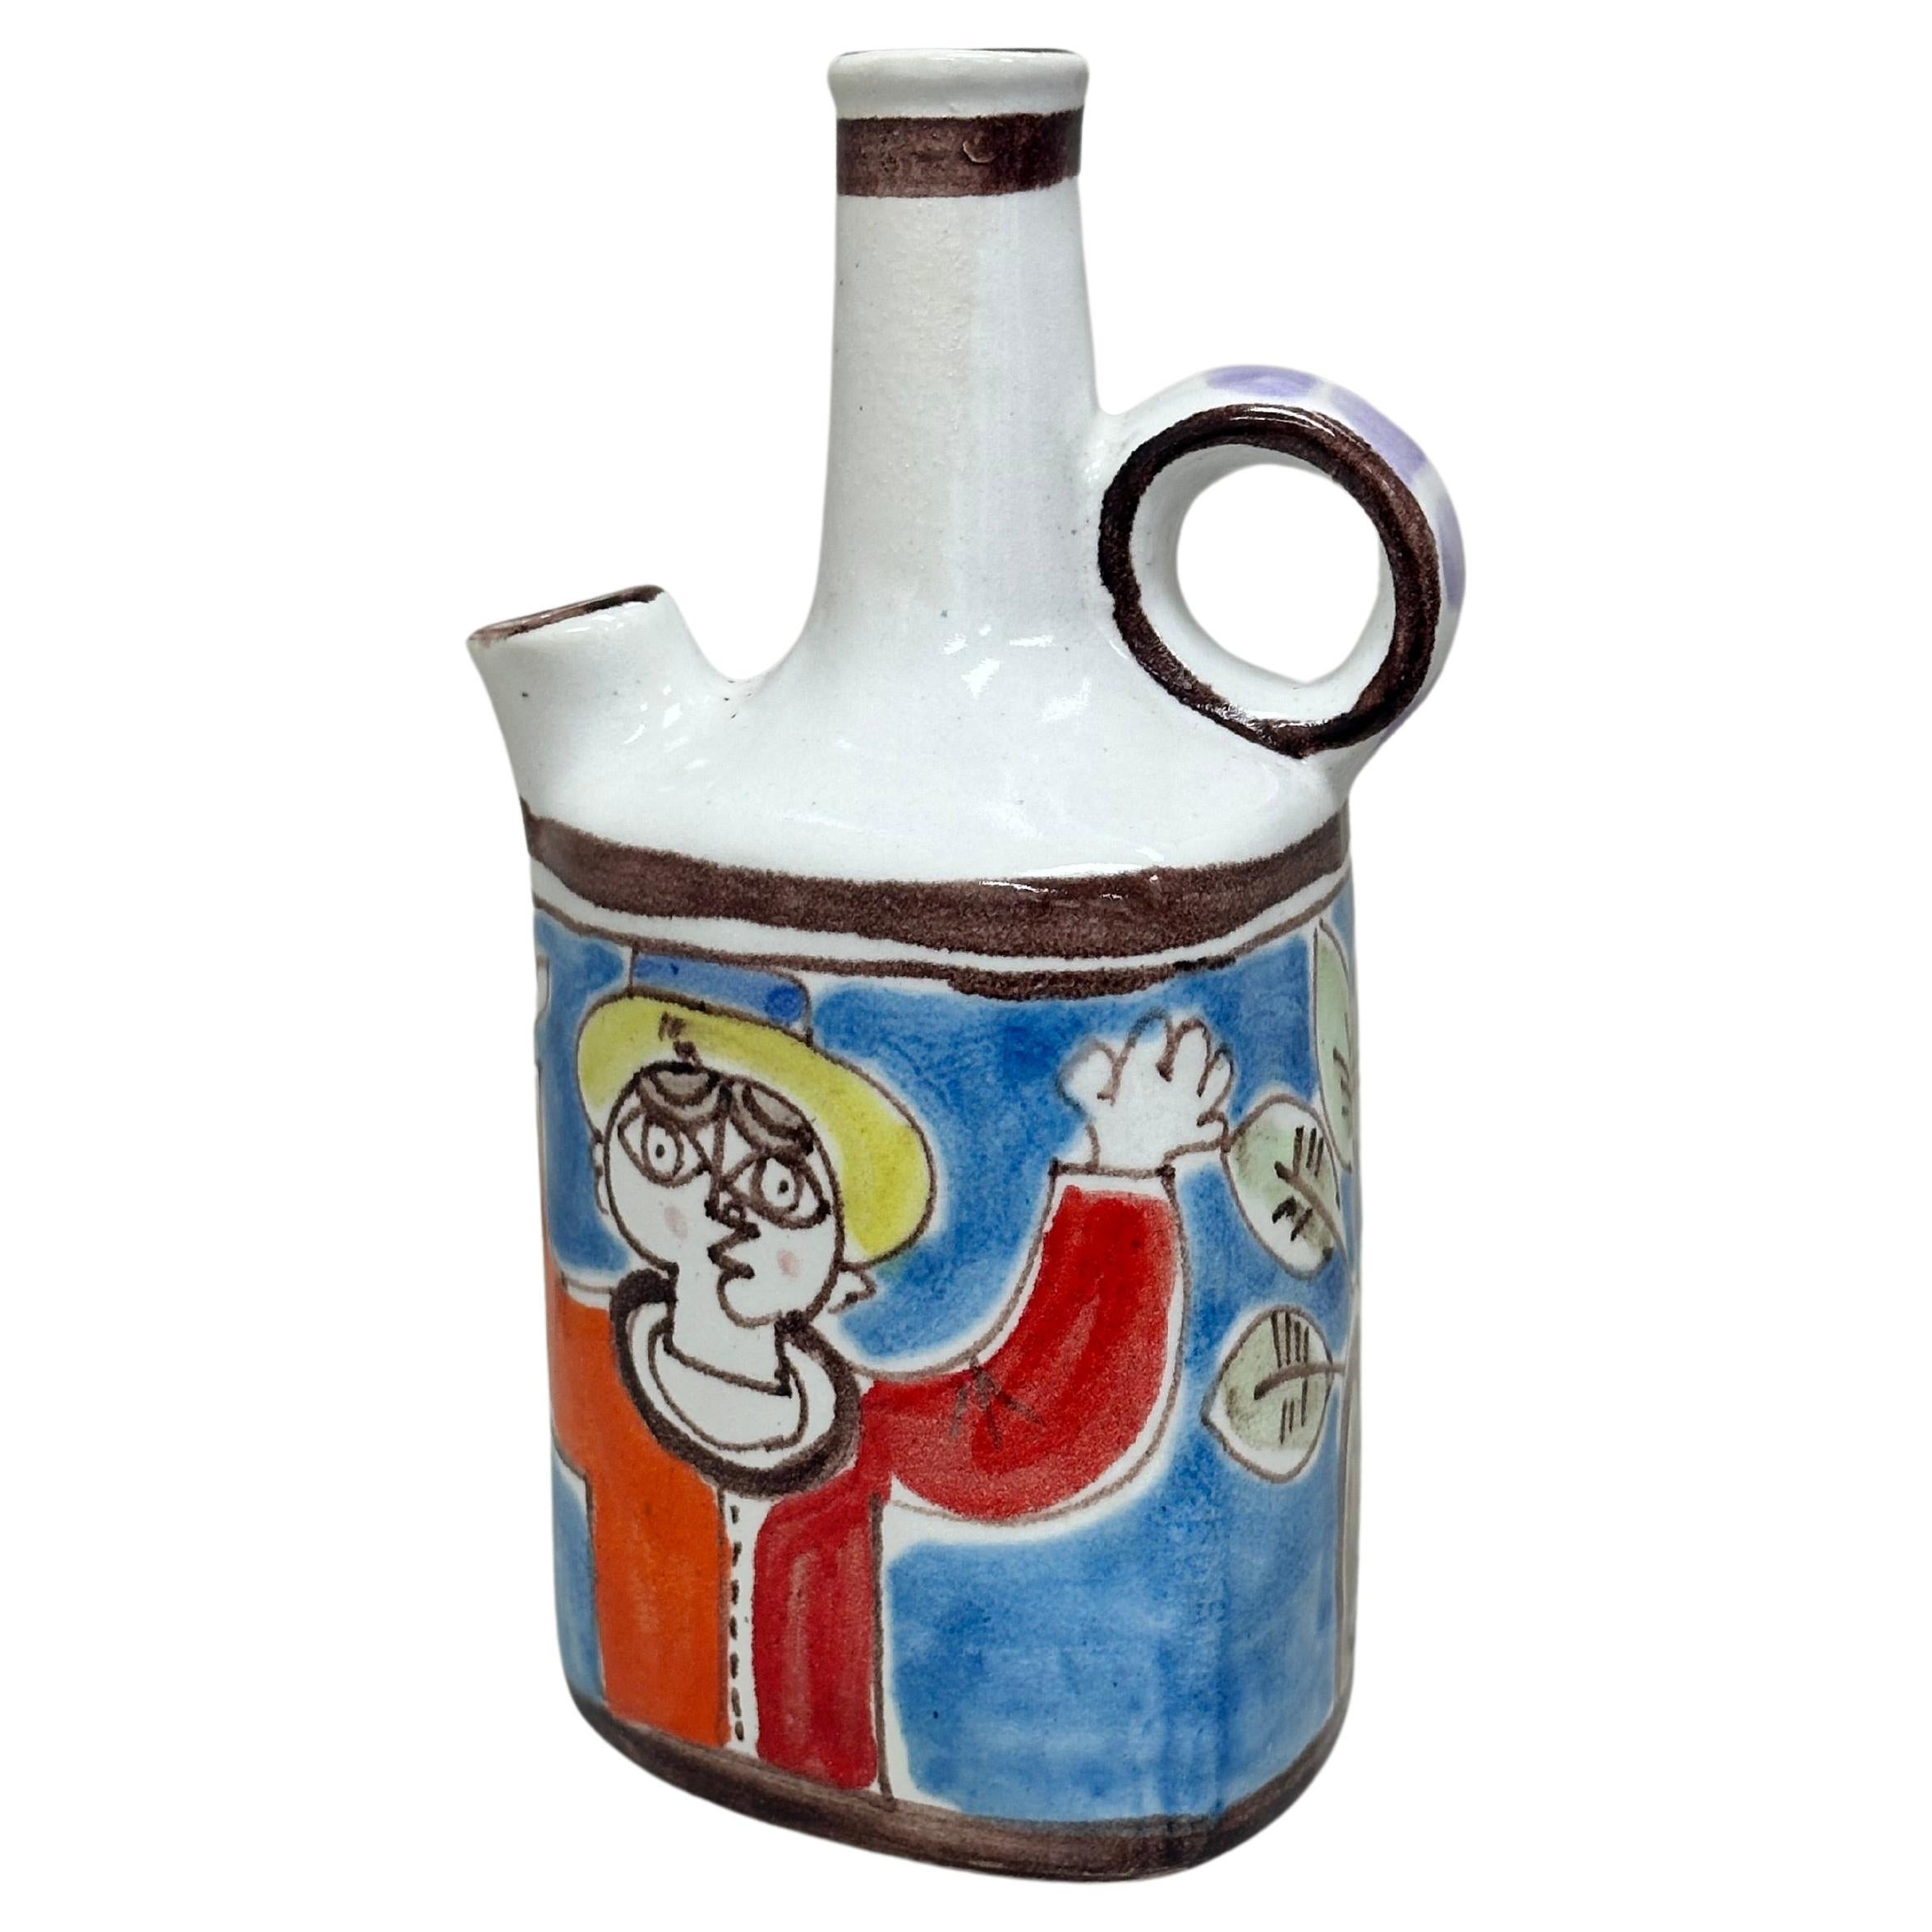 Giovanni de Simone Hand-Painted Jug Vase

This three-sided handled jug vase by famed Italian artist Giovanni de Simone (1930-1991) is an original gem. The vase features several colorful hand-painted portraits in the style of Picasso. The base of the